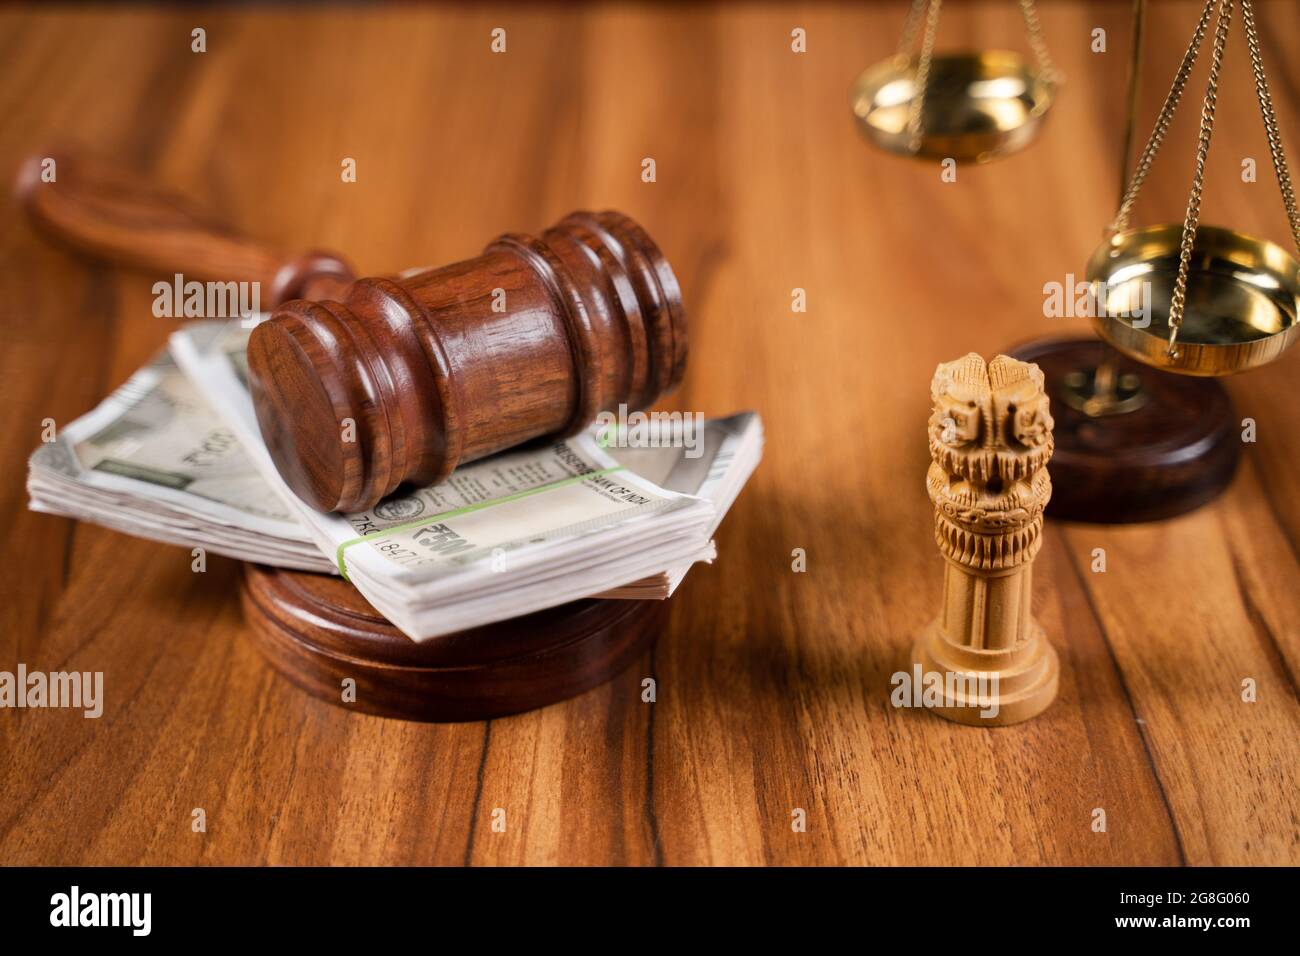 Concept showing of judicial corruption by hitting judge gavel on currency note bundles. Stock Photo